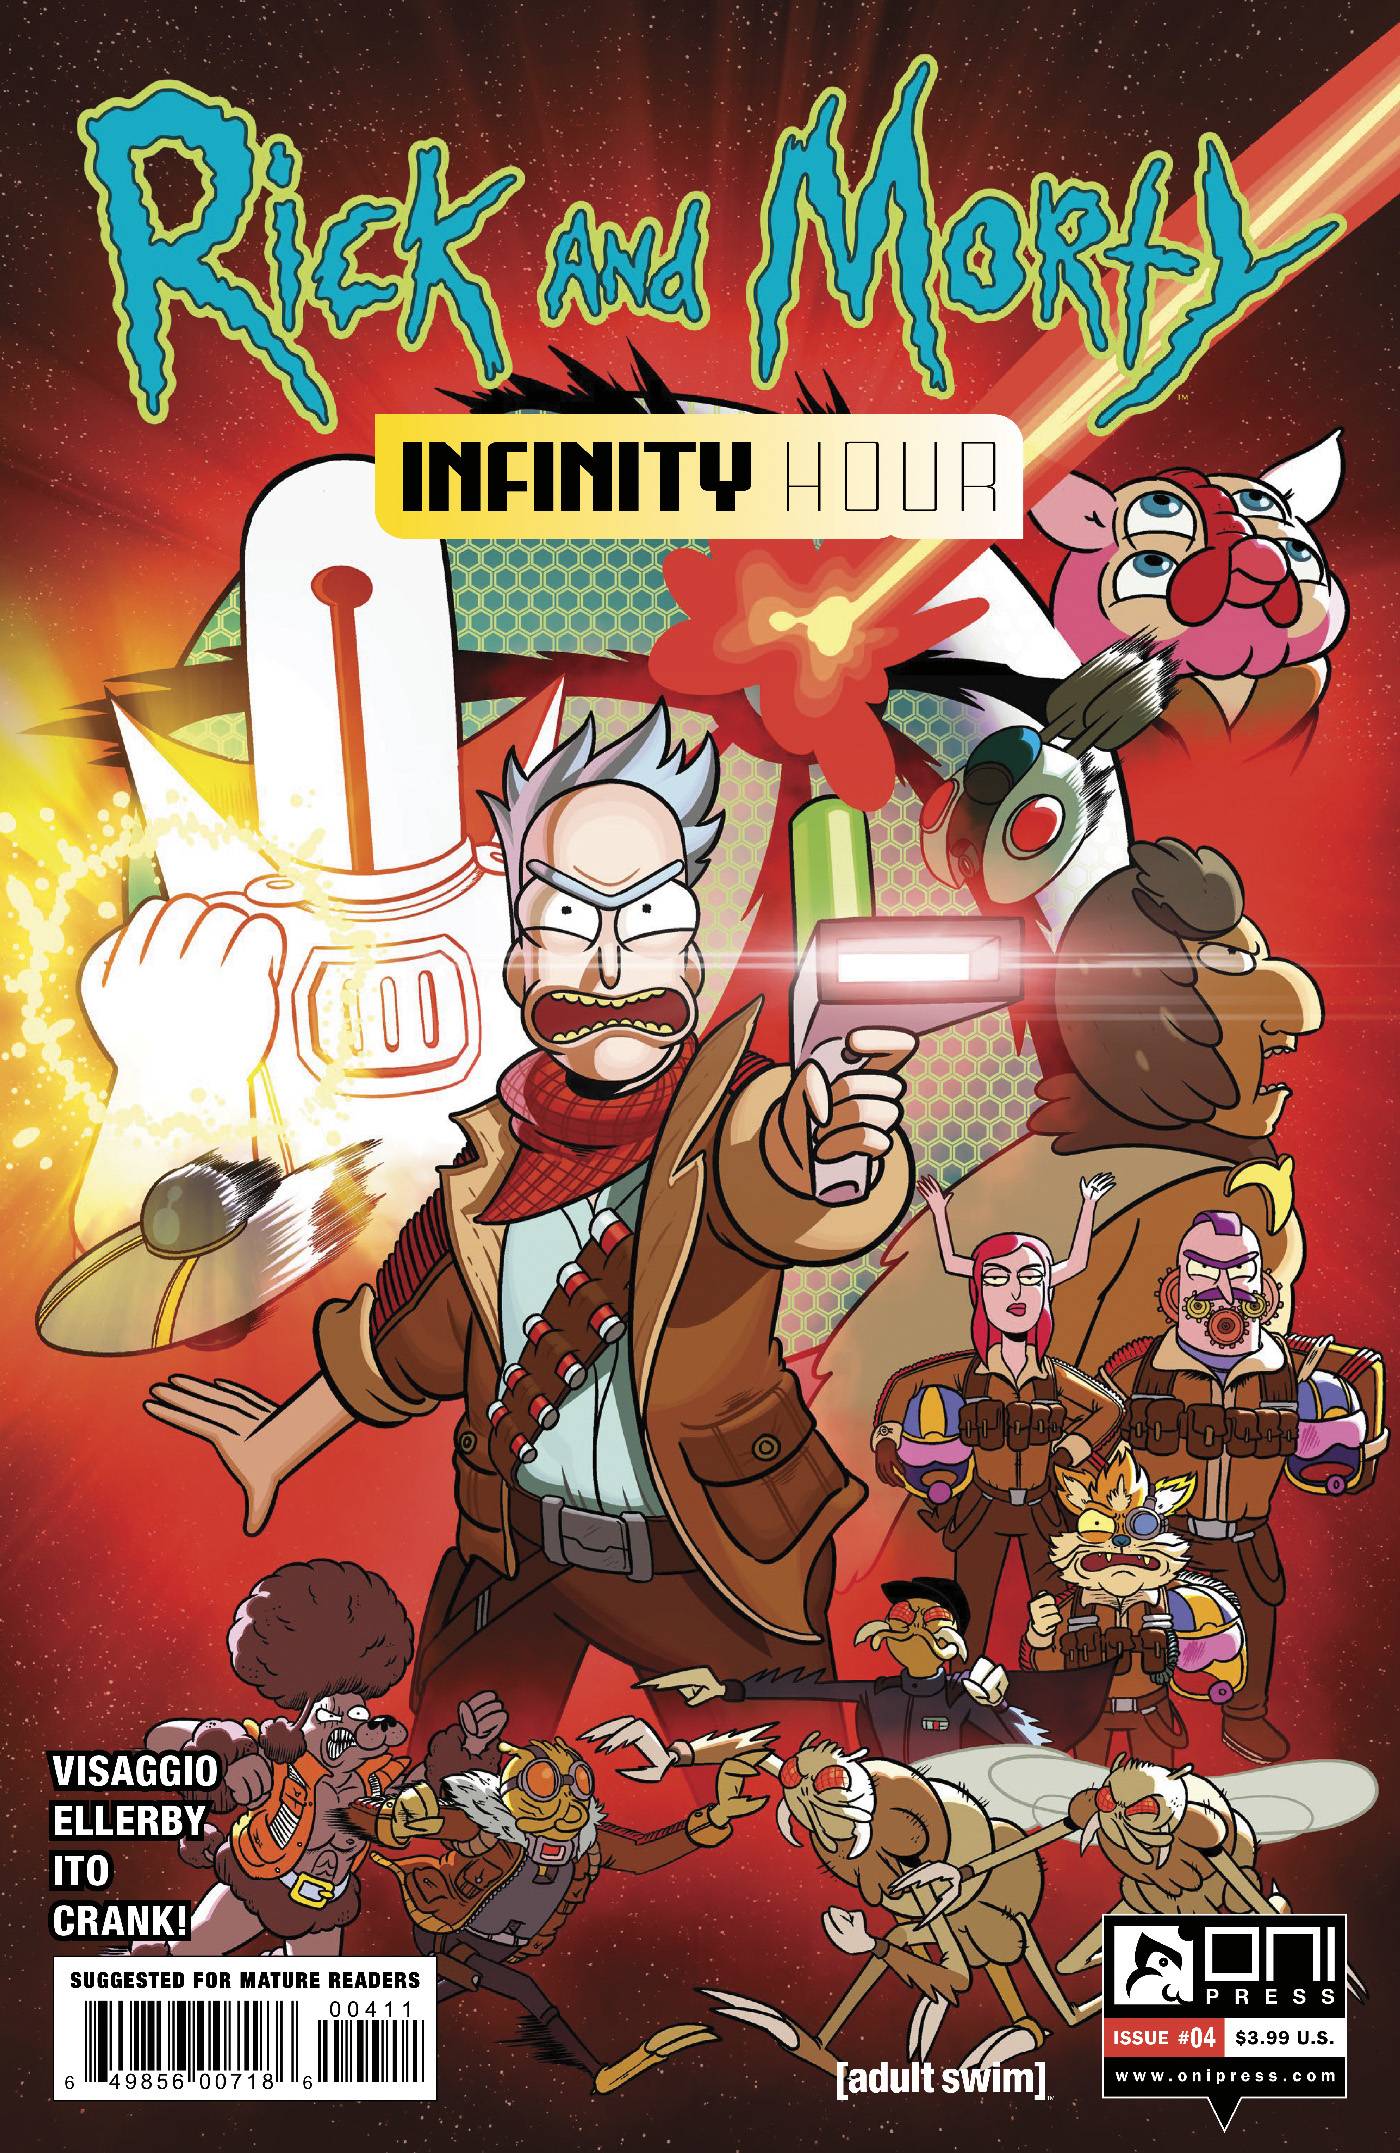 RICK AND MORTY INFINITY HOUR #4 (OF 4) CVR A MARC ELLERBY